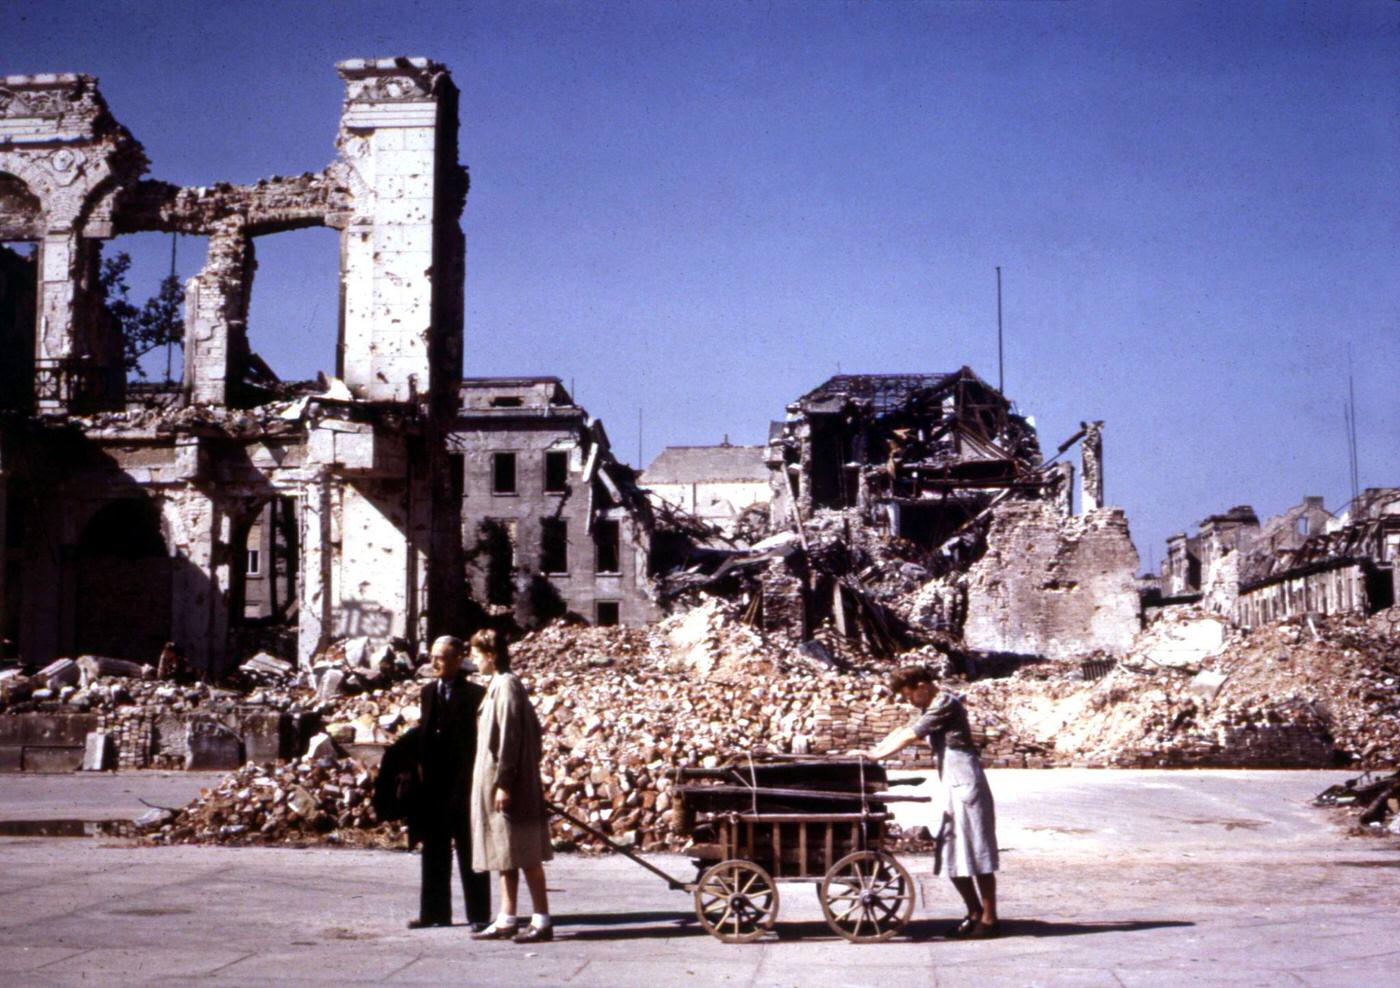 Downtown Berlin reduced to rubble and ruins, 1945, Germany.